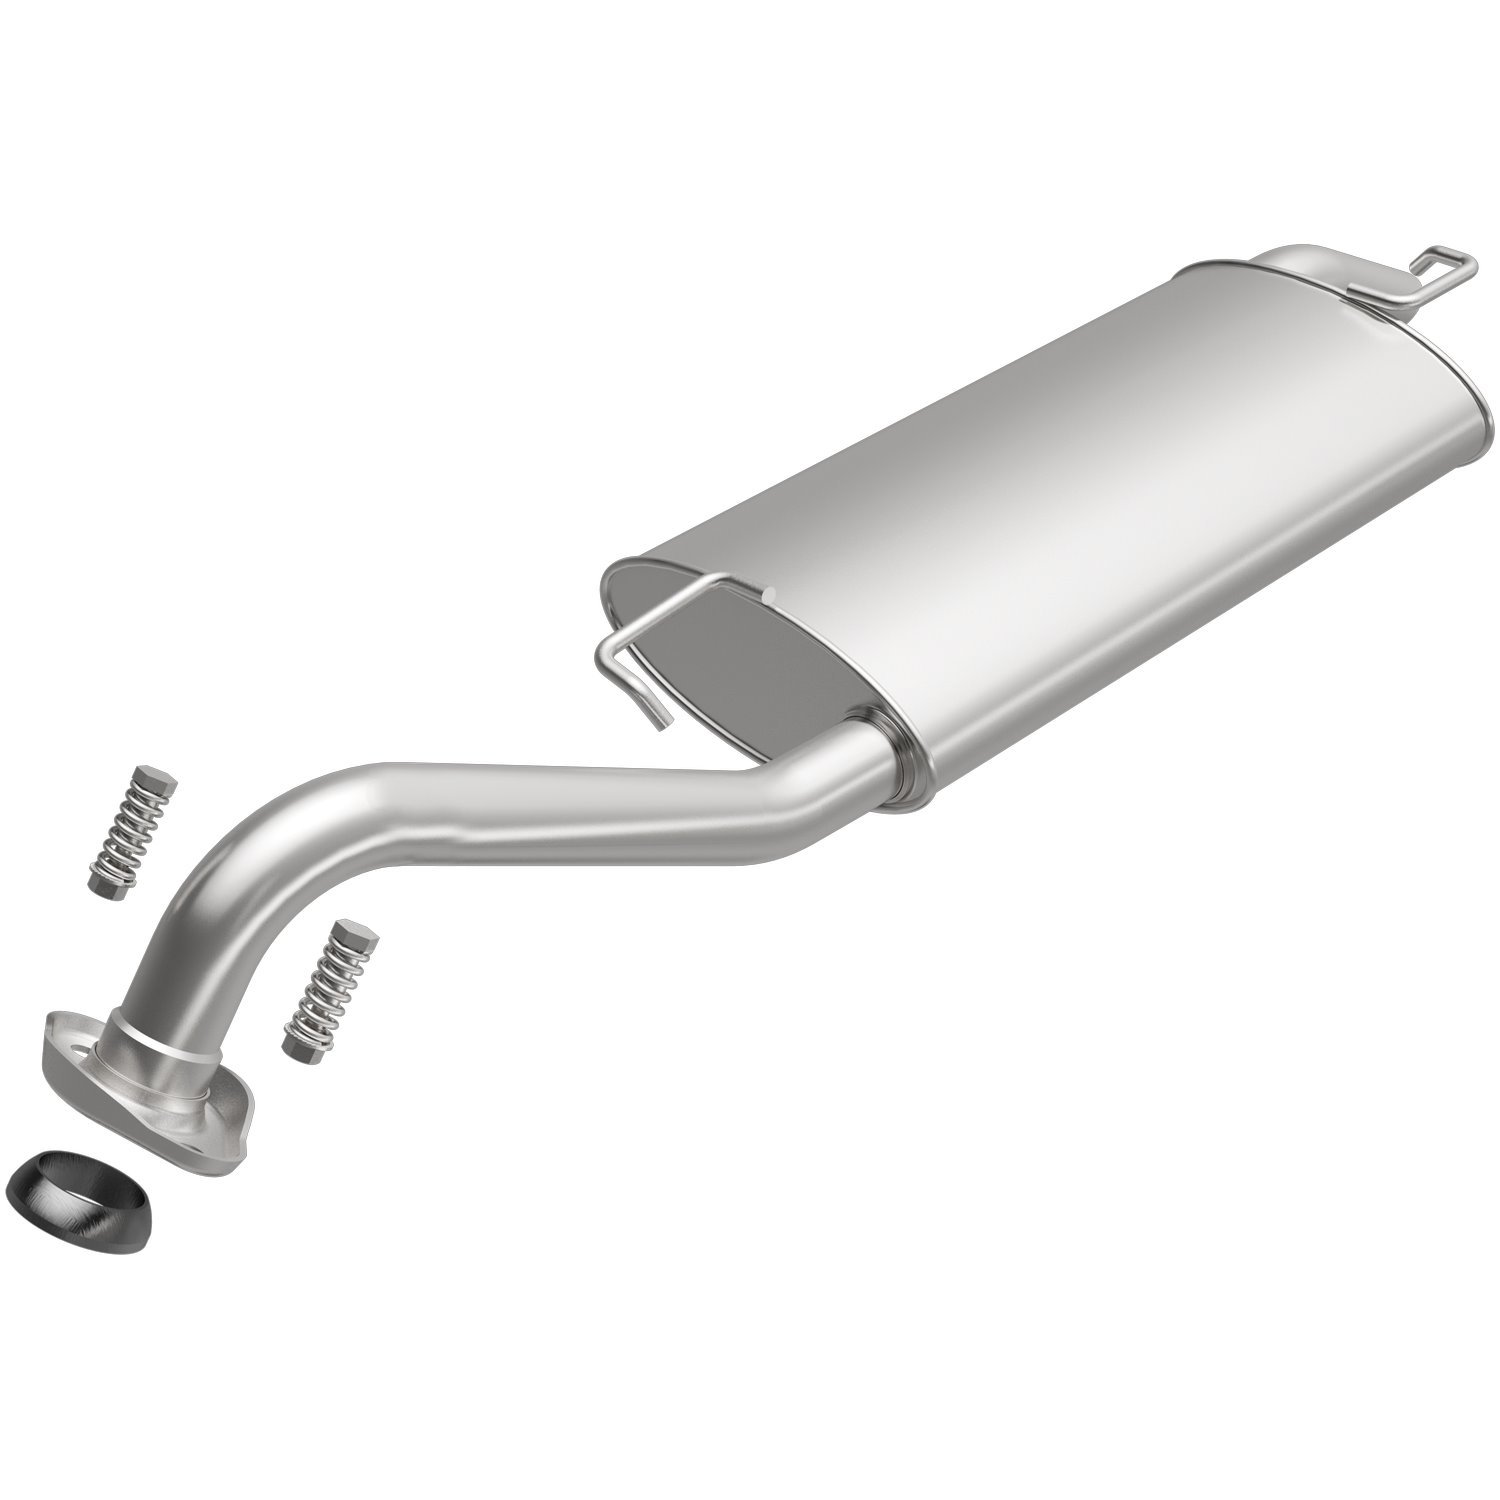 Direct-Fit Exhaust Kit, 2003-2013 Toyota Corolla 1.8L